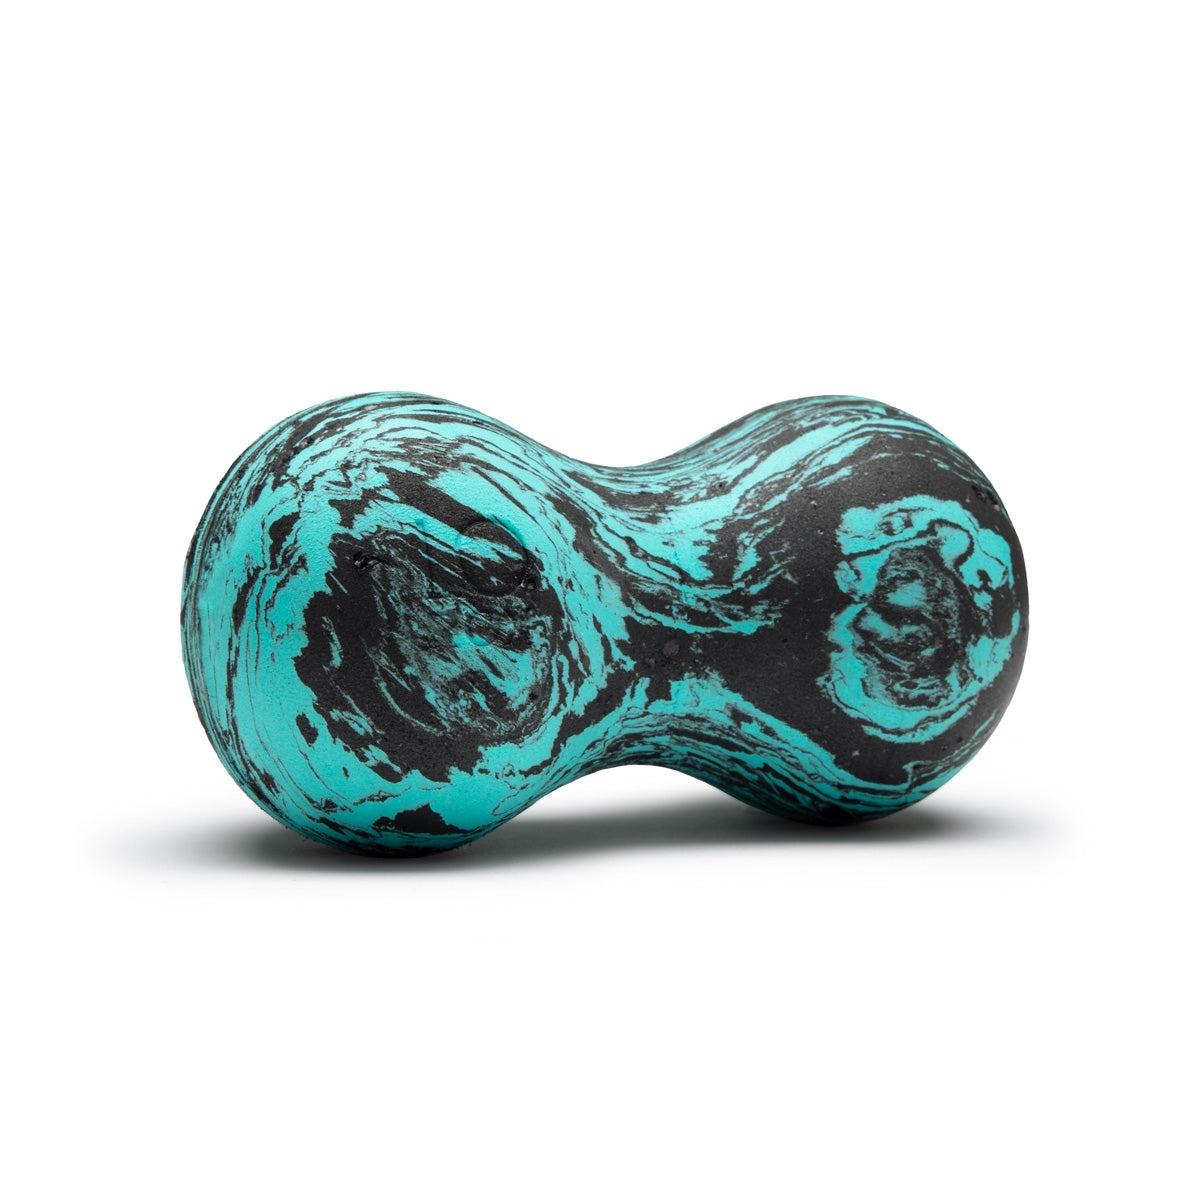 LO ROX Aligned Life Mini Infinity Roll Peanut - Not eligible for discount